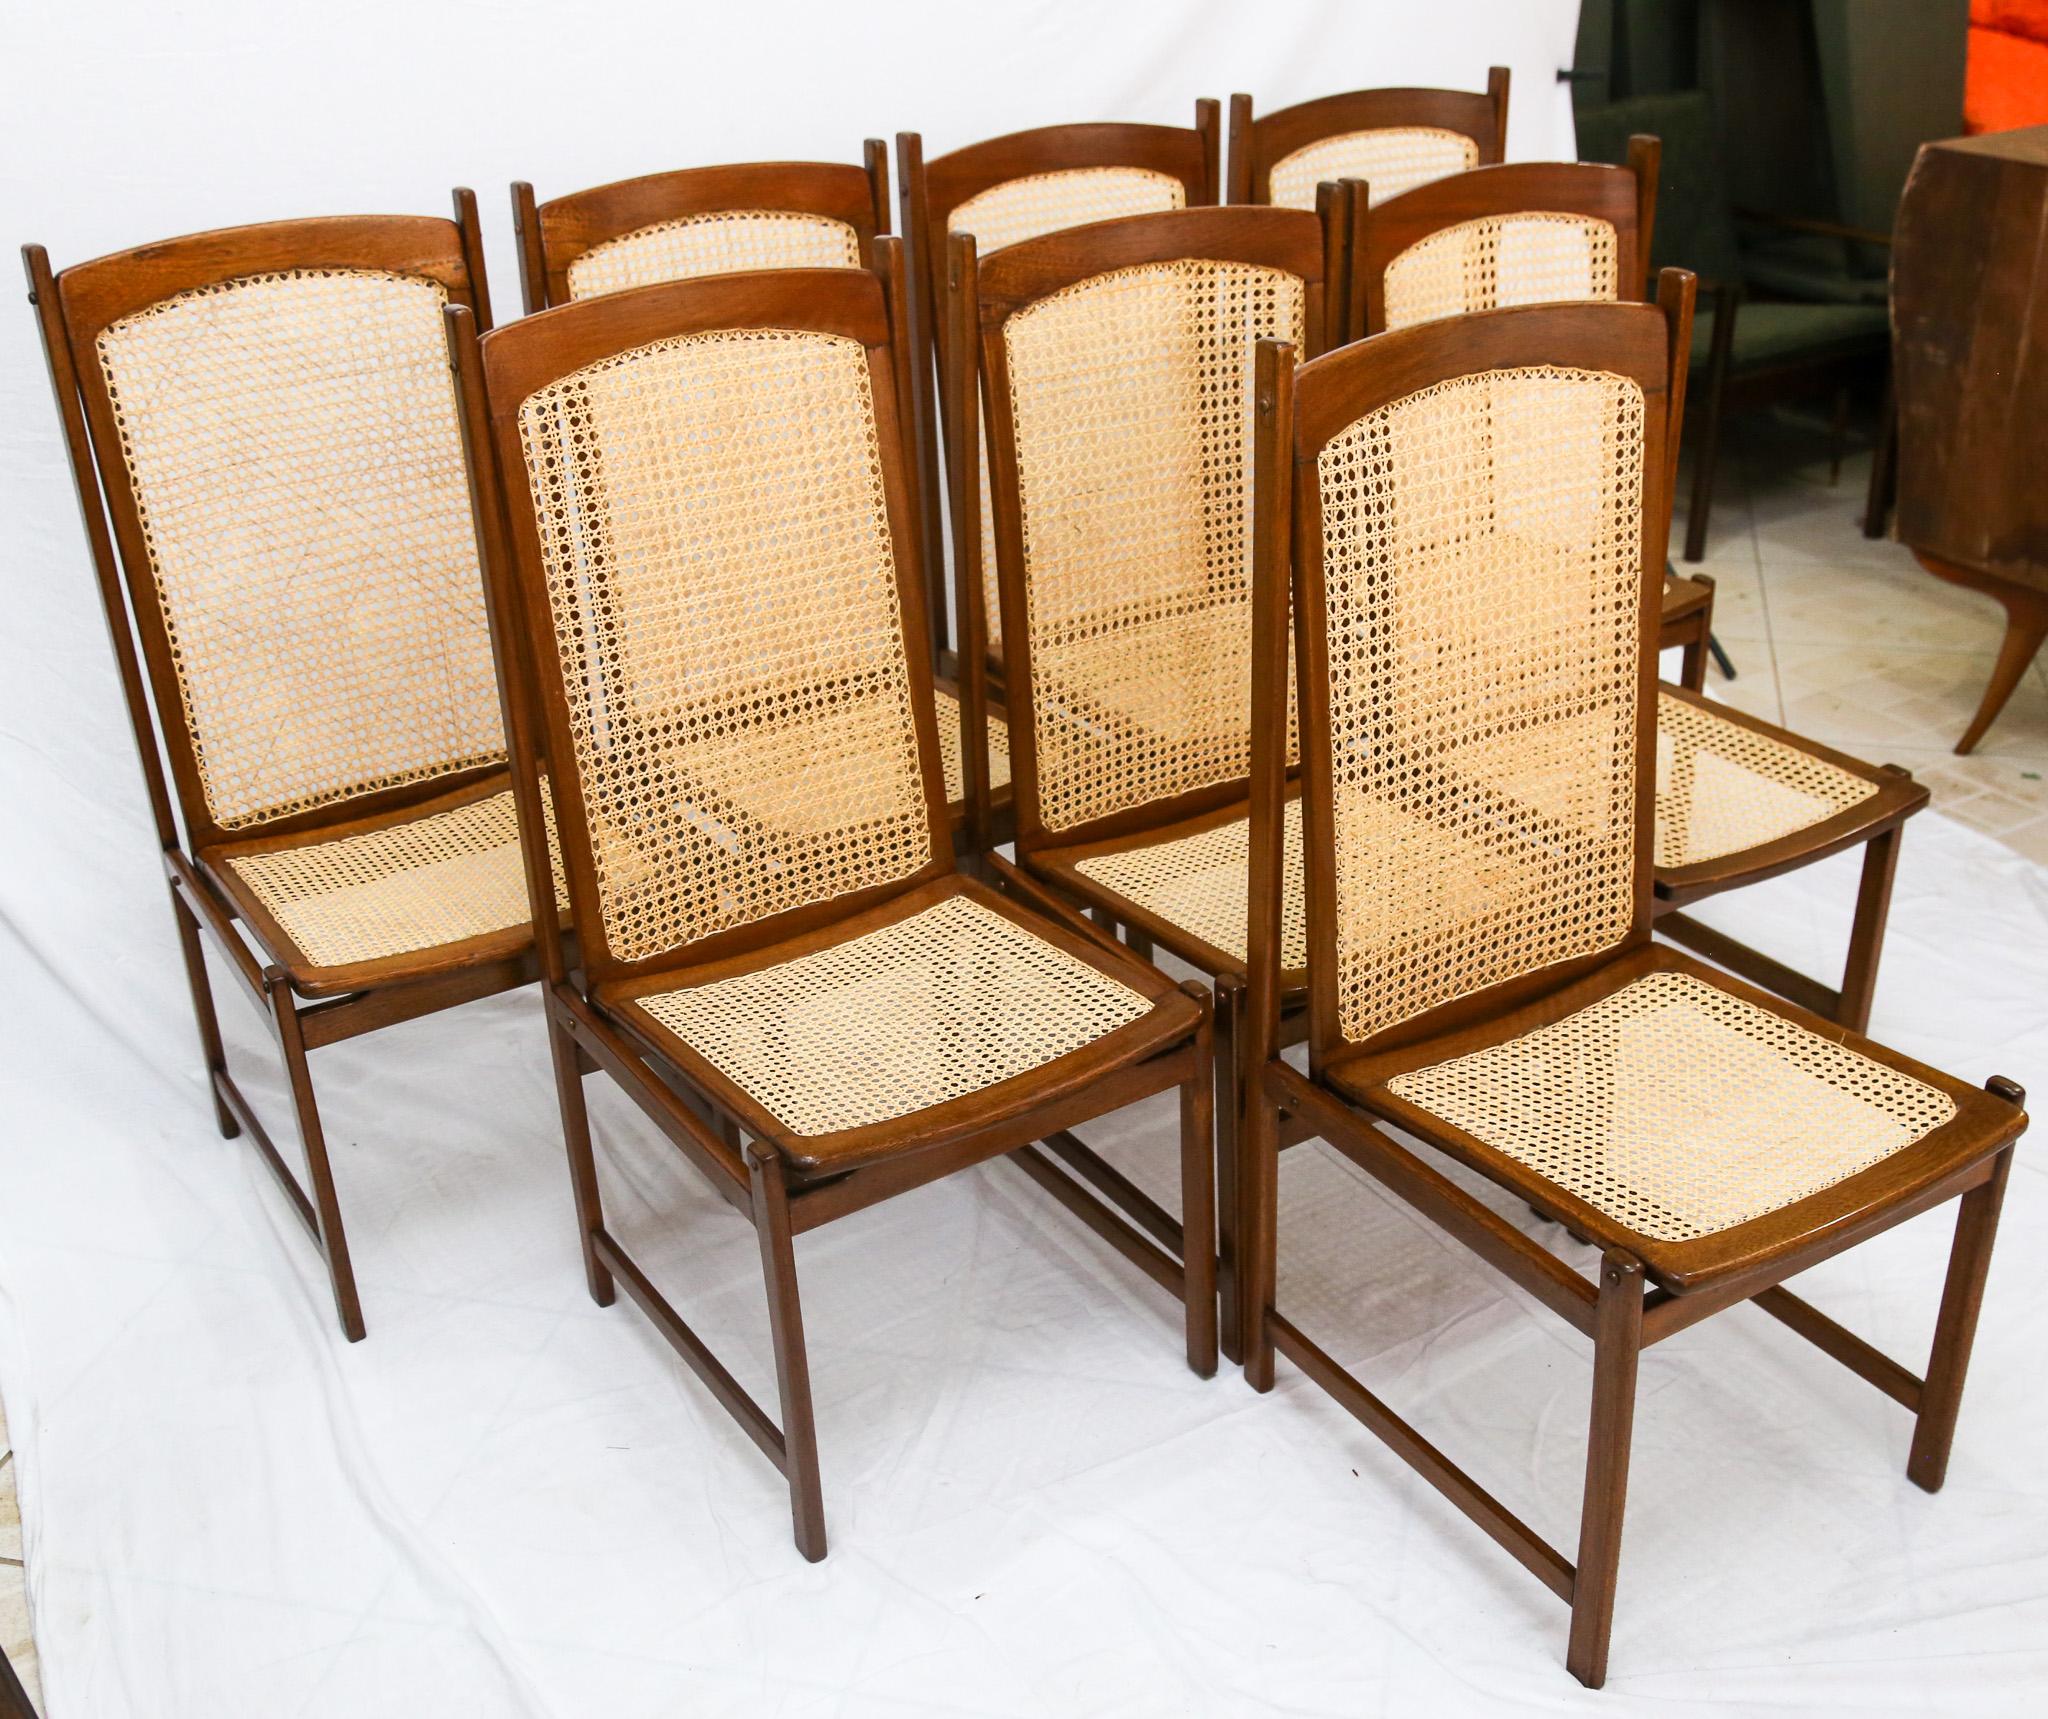 Cane Mid-Century Modern Dining Chair Set in Hardwood & Caning, Celina, Brazil, 1960s For Sale